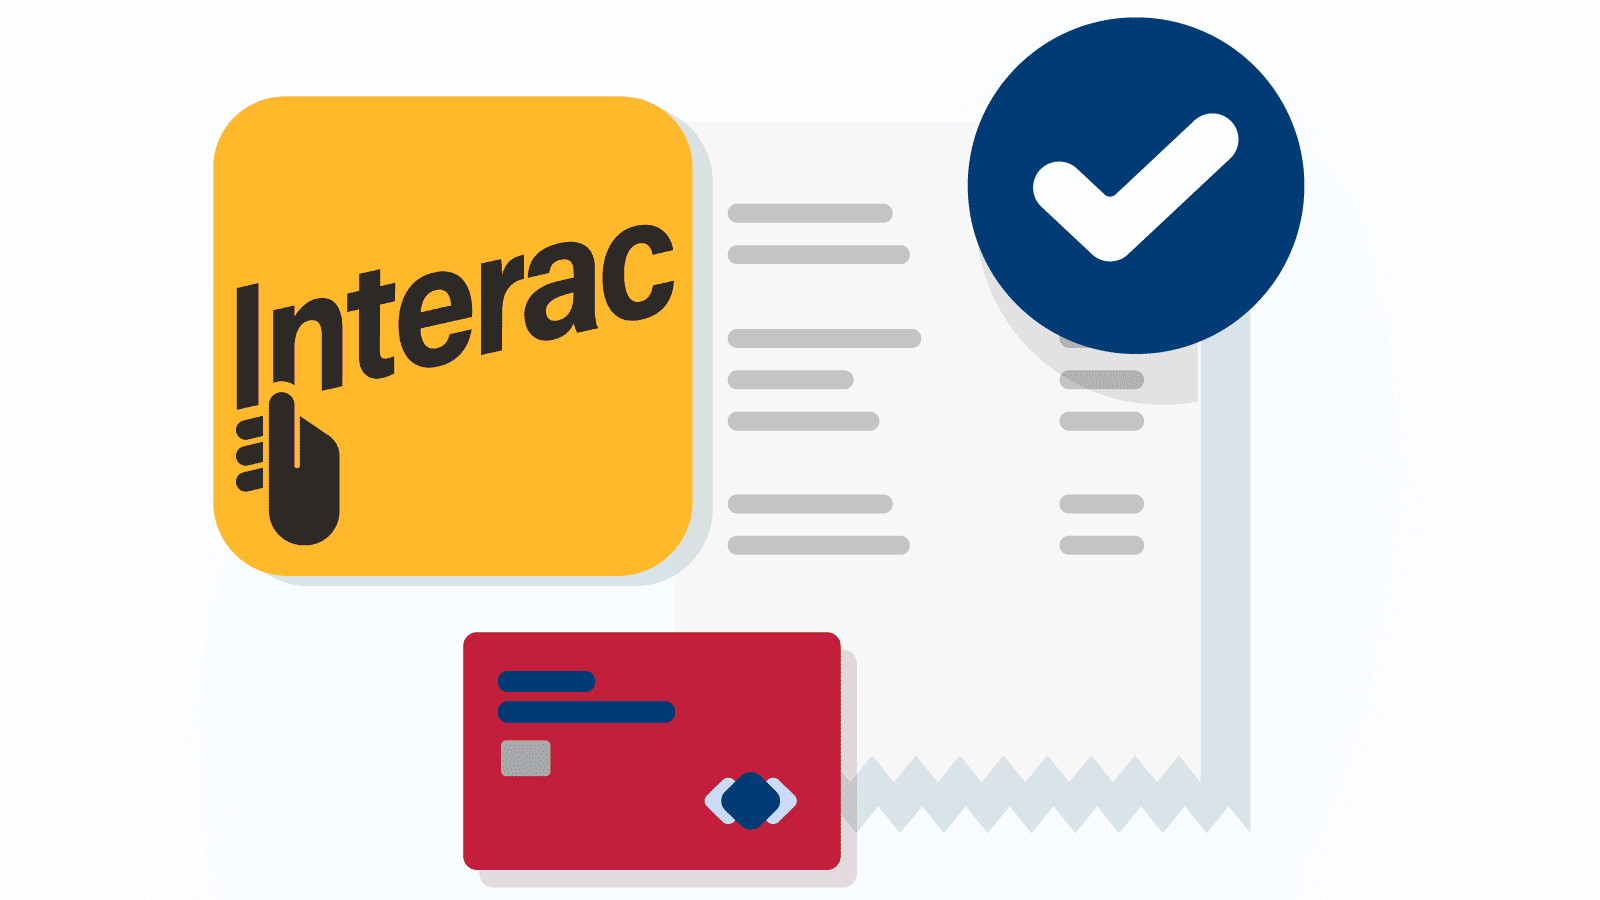 Interac Online Casino Payment Method Review